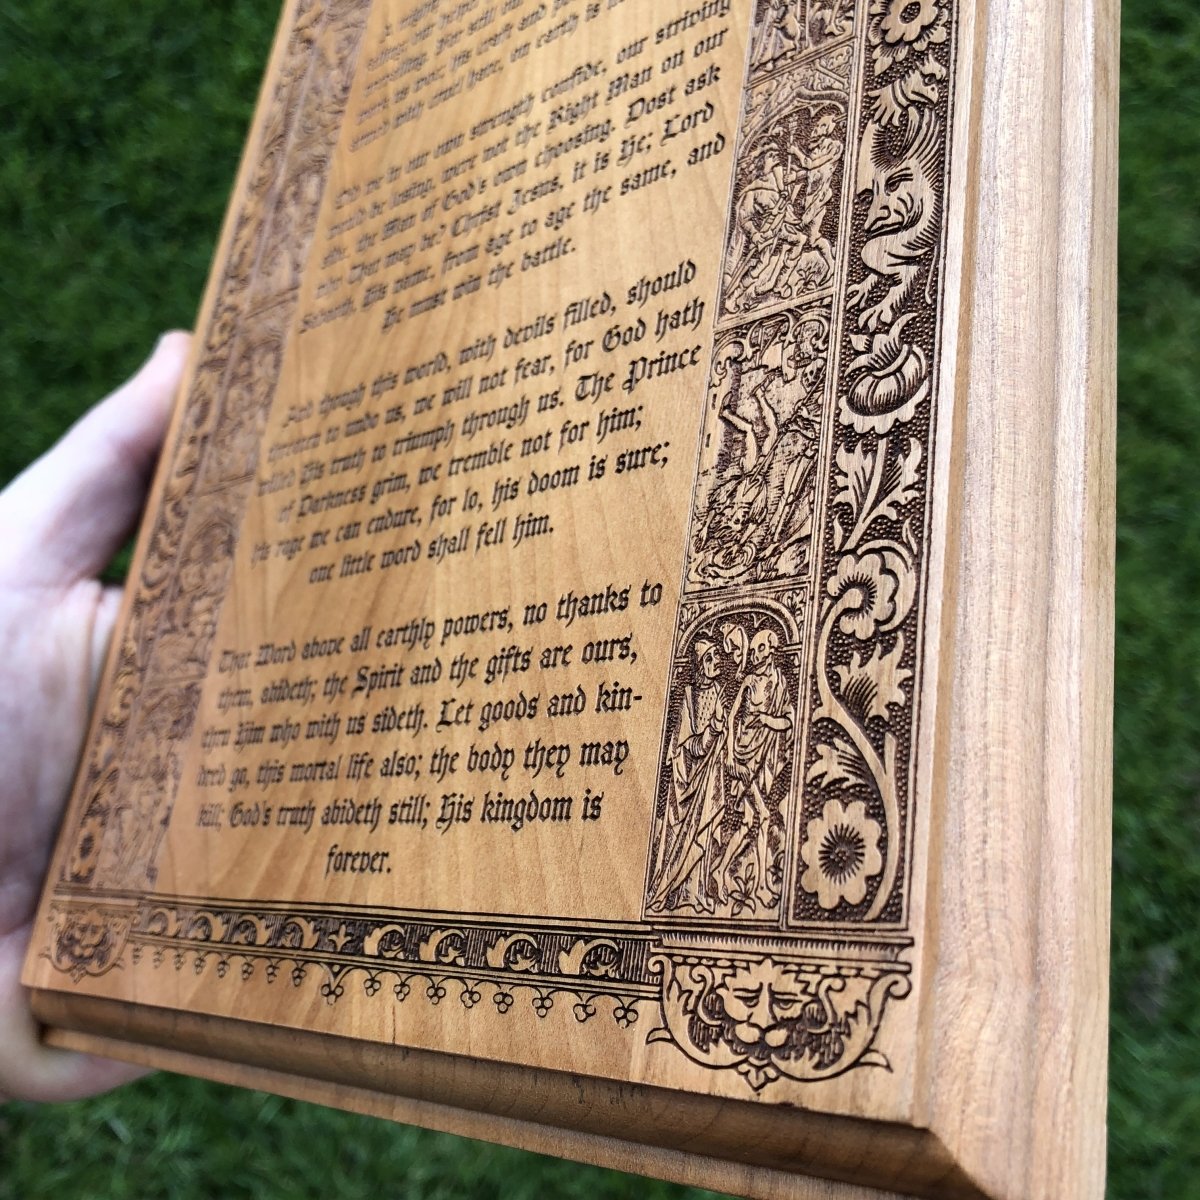 Engravedwood - Mighty Fortress - Engraved Wood Art - The Reformed Sage - #reformed# - #reformed_gifts# - #christian_gifts#